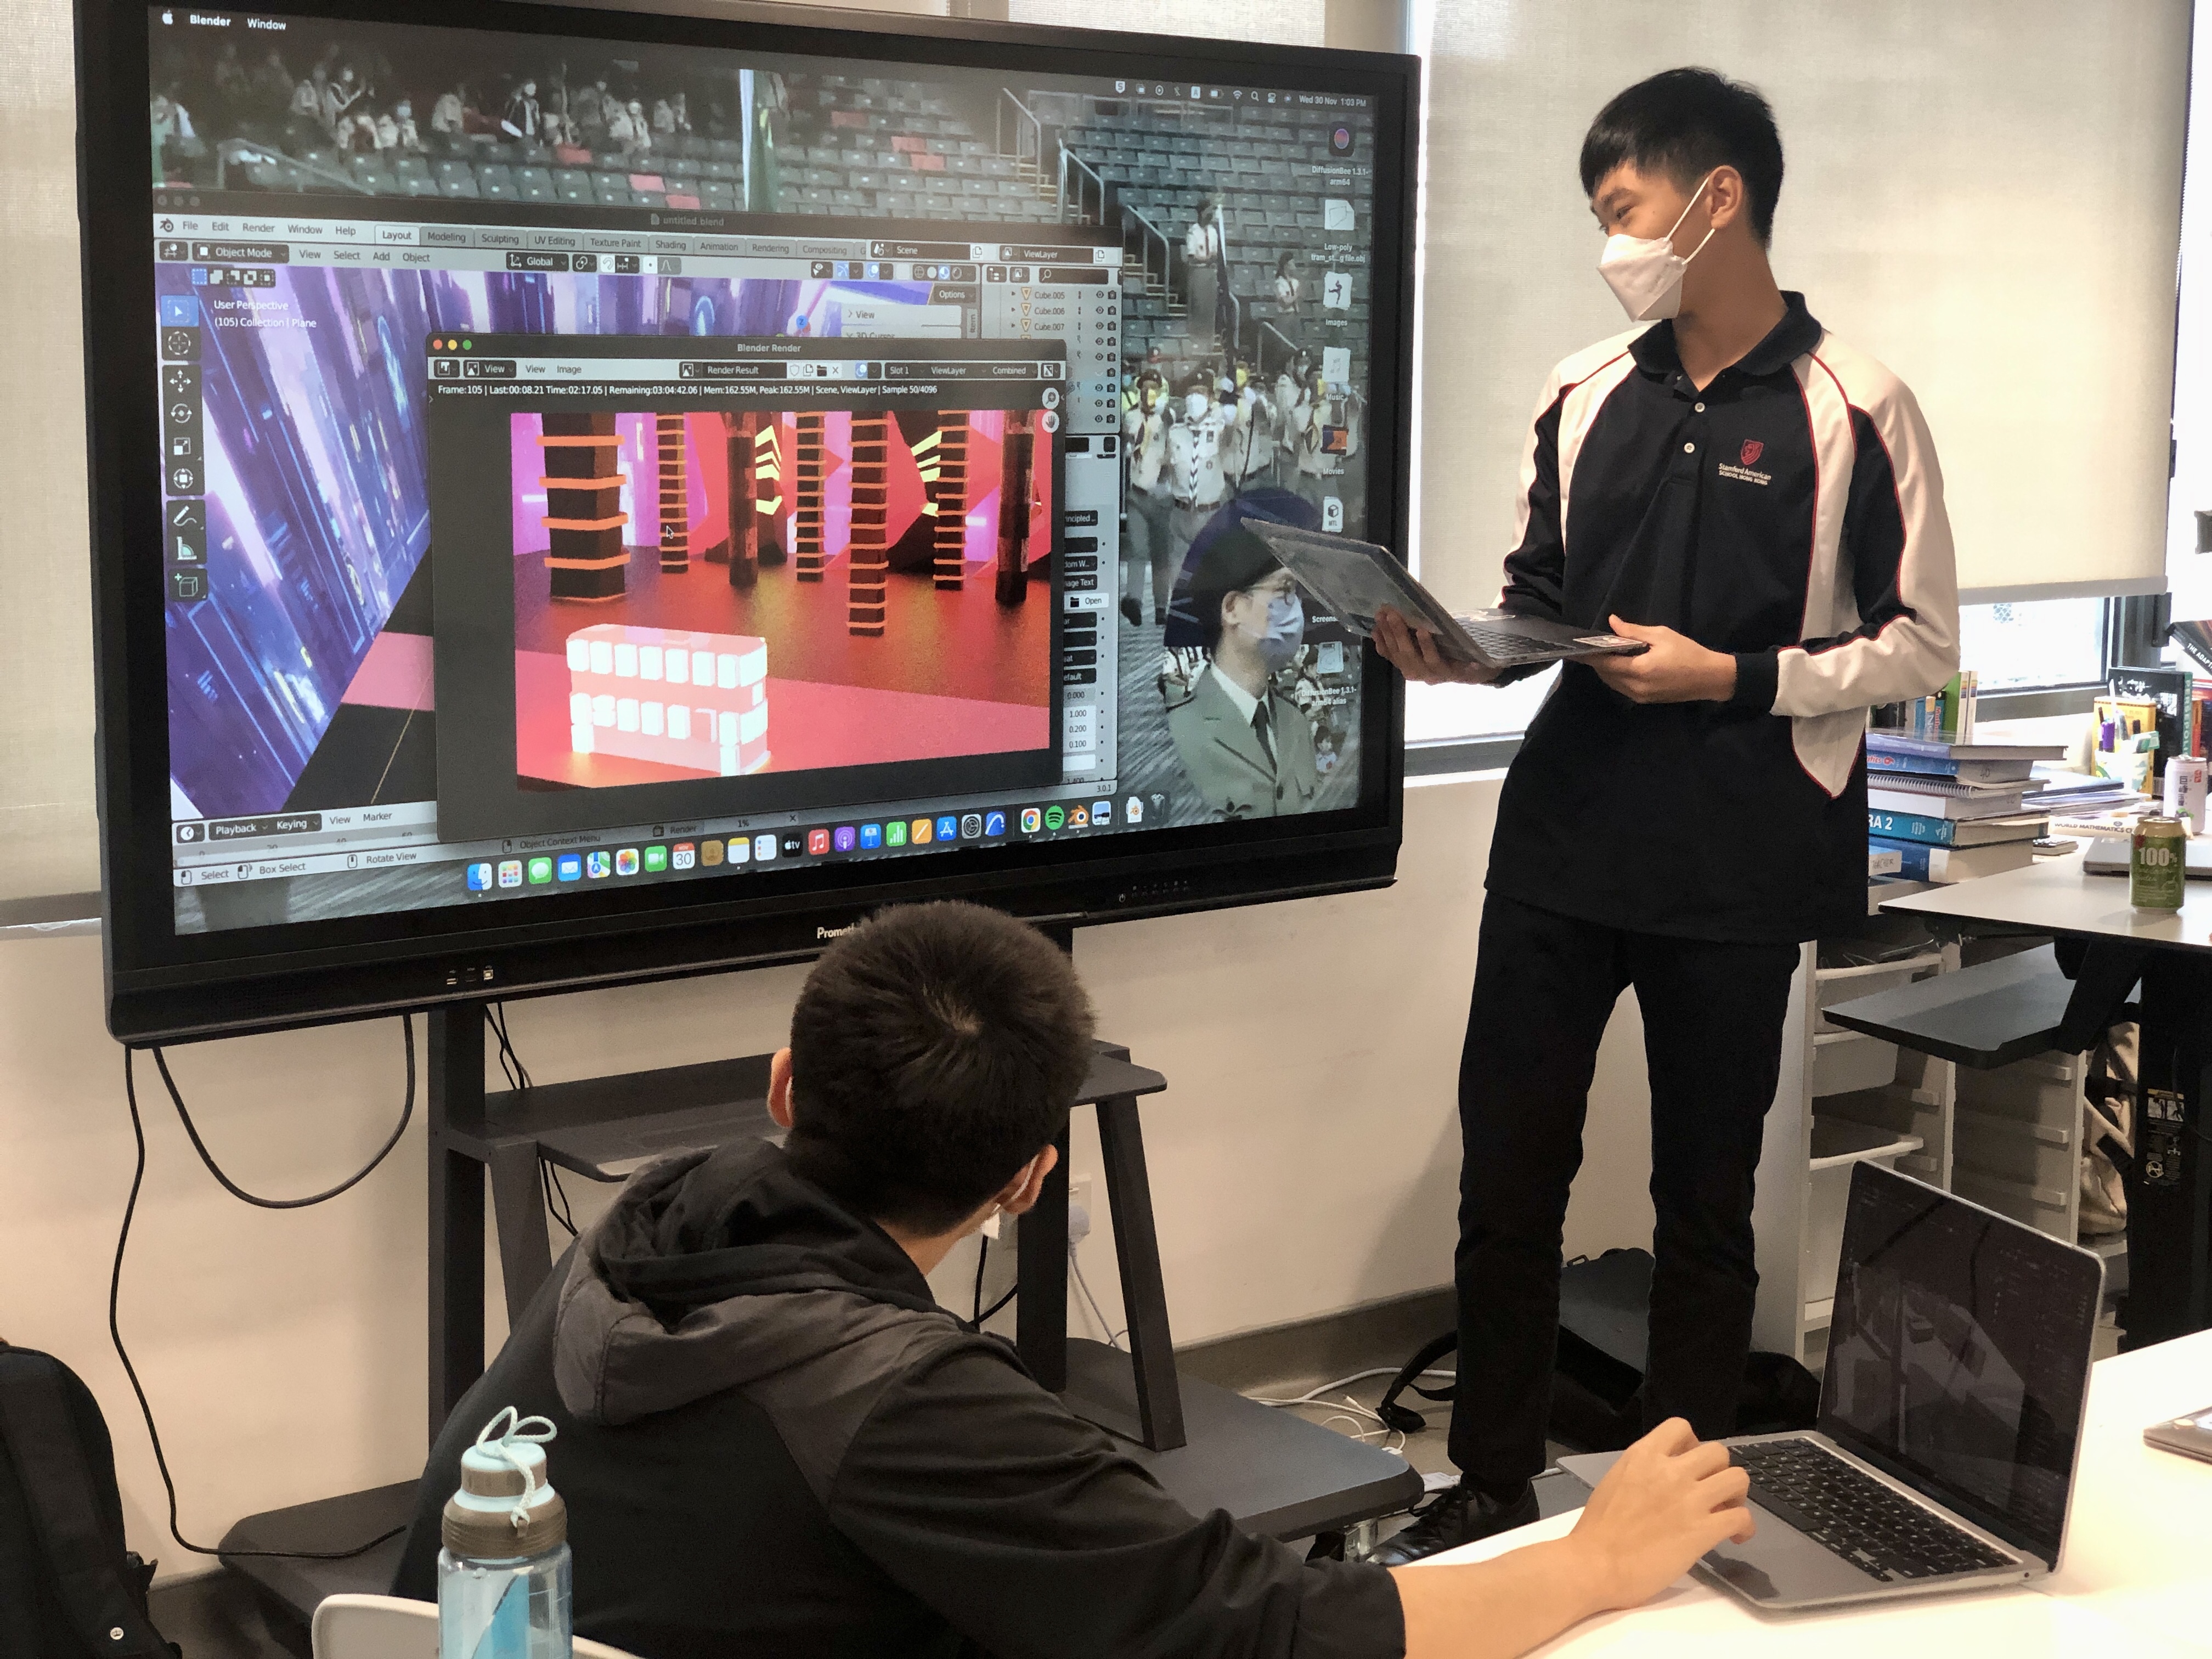 Grade 10 student presenting the final Cornerstones project, a 3D animation tram render in a cityscape.